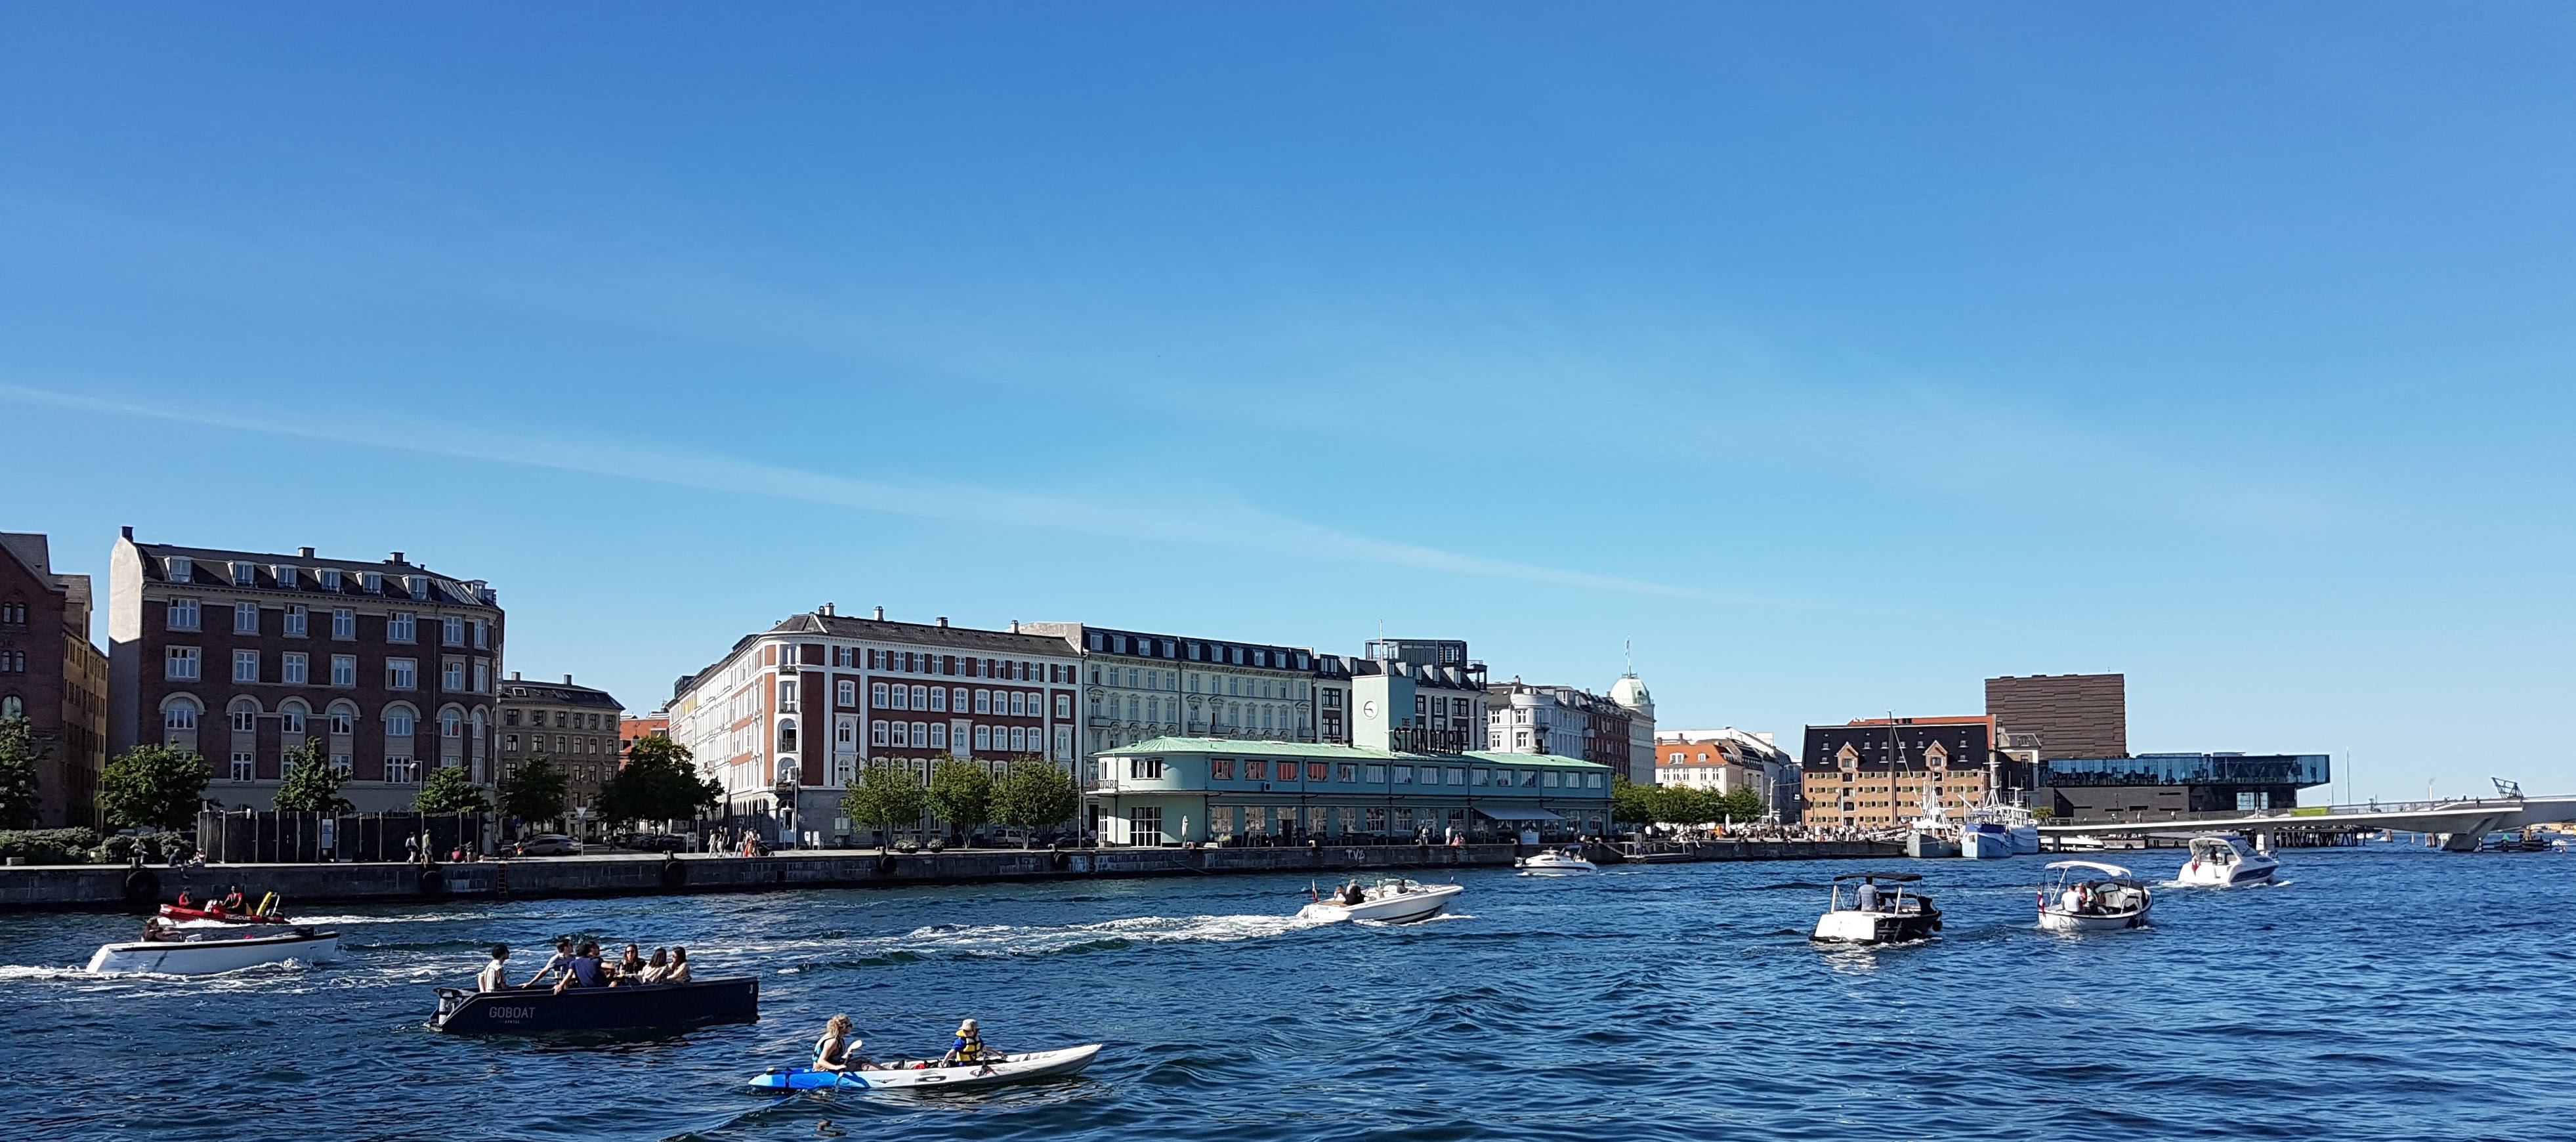 Copenhagen canals cruise with a picnic boat, August